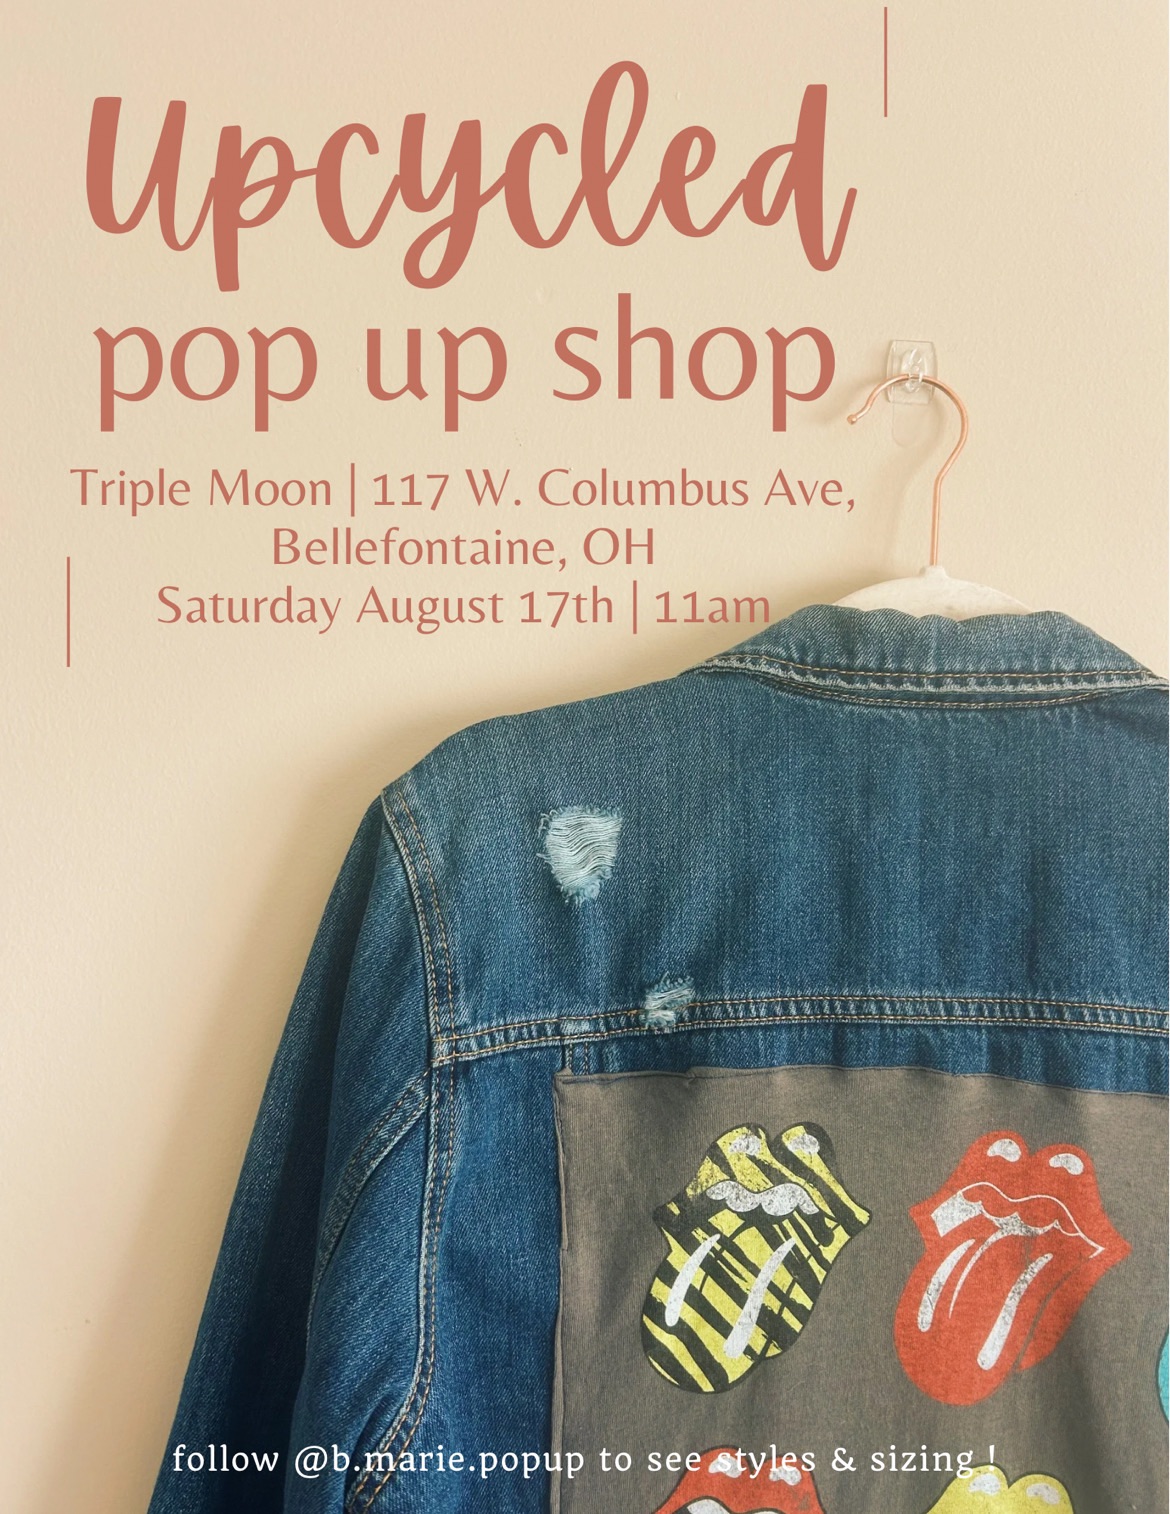 triple moon upcycled pop up